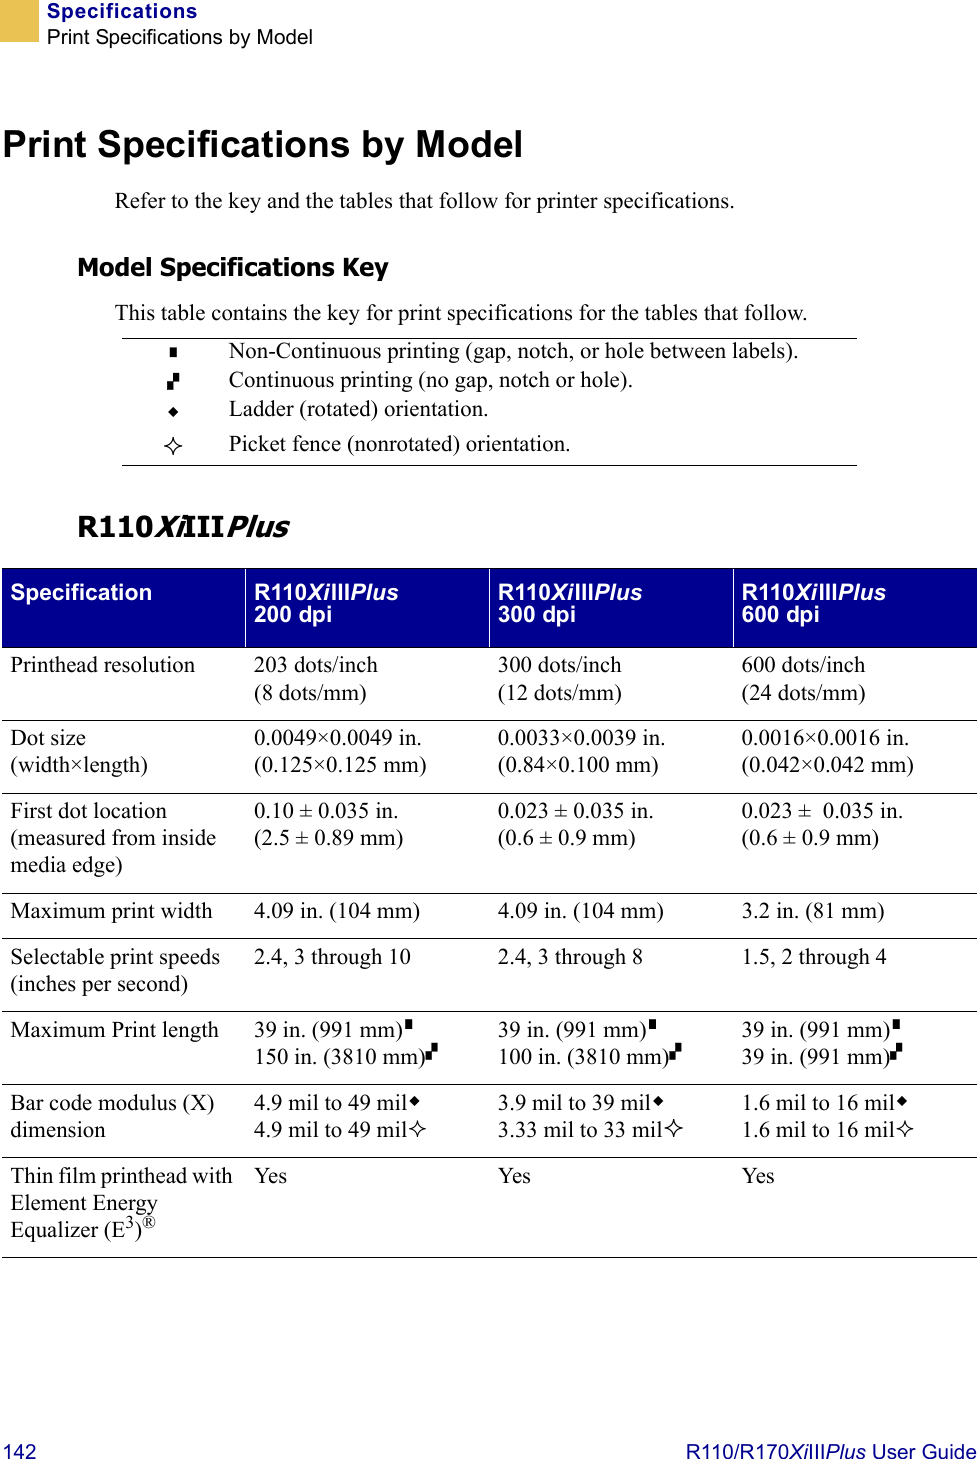 142  R110/R170XiIIIPlus User GuideSpecificationsPrint Specifications by ModelPrint Specifications by ModelRefer to the key and the tables that follow for printer specifications.Model Specifications KeyThis table contains the key for print specifications for the tables that follow.R110XiIIIPlusNon-Continuous printing (gap, notch, or hole between labels).Continuous printing (no gap, notch or hole).Ladder (rotated) orientation.Picket fence (nonrotated) orientation.Specification R110XiIIIPlus200 dpiR110XiIIIPlus300 dpiR110XiIIIPlus600 dpiPrinthead resolution 203 dots/inch (8 dots/mm)300 dots/inch(12 dots/mm)600 dots/inch(24 dots/mm)Dot size (width×length)0.0049×0.0049 in.(0.125×0.125 mm)0.0033×0.0039 in.(0.84×0.100 mm)0.0016×0.0016 in.(0.042×0.042 mm)First dot location (measured from inside media edge)0.10 ± 0.035 in.(2.5 ± 0.89 mm)0.023 ± 0.035 in.(0.6 ± 0.9 mm)0.023 ±  0.035 in. (0.6 ± 0.9 mm)Maximum print width 4.09 in. (104 mm) 4.09 in. (104 mm) 3.2 in. (81 mm)Selectable print speeds (inches per second)2.4, 3 through 10 2.4, 3 through 8 1.5, 2 through 4Maximum Print length  39 in. (991 mm)150 in. (3810 mm)39 in. (991 mm)100 in. (3810 mm)39 in. (991 mm)39 in. (991 mm)Bar code modulus (X) dimension4.9 mil to 49 mil4.9 mil to 49 mil3.9 mil to 39 mil3.33 mil to 33 mil1.6 mil to 16 mil1.6 mil to 16 milThin film printhead with Element Energy Equalizer (E3)®Yes Yes Ye s